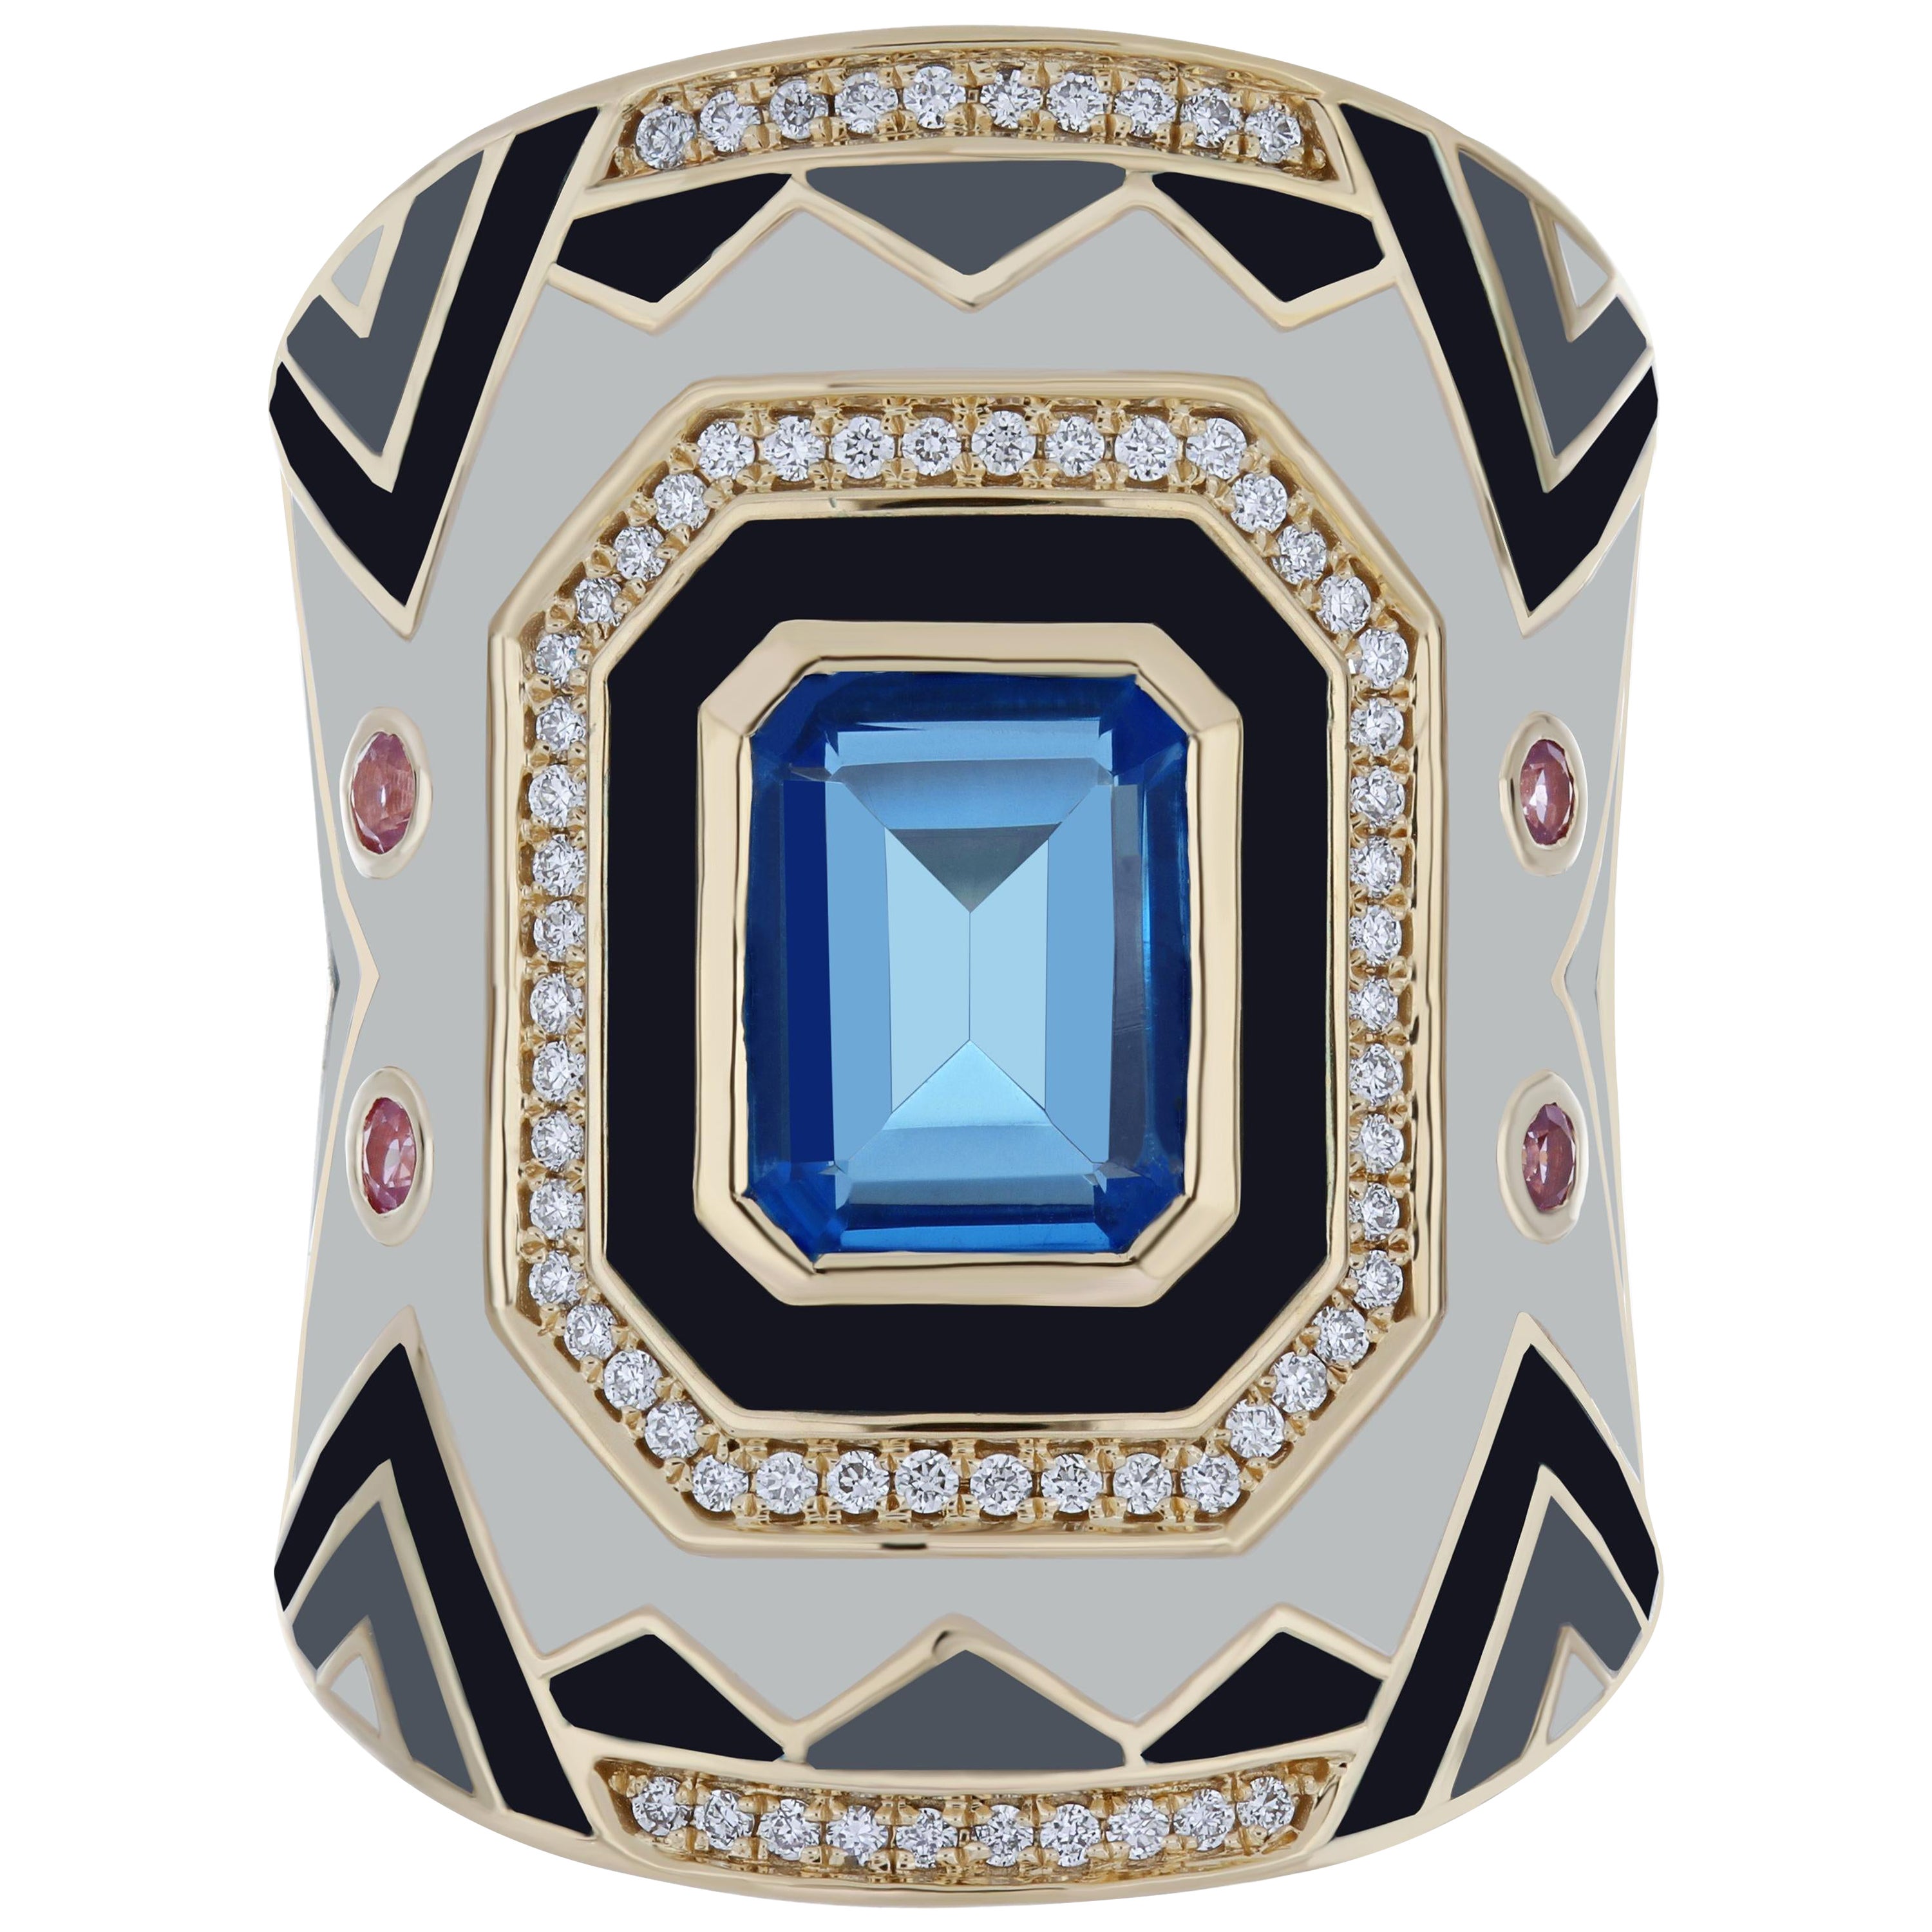 For Sale:  Swiss Blue Topaz, Pink Sapphire & Diamond Ring with Enamel in 14K Yellow Gold